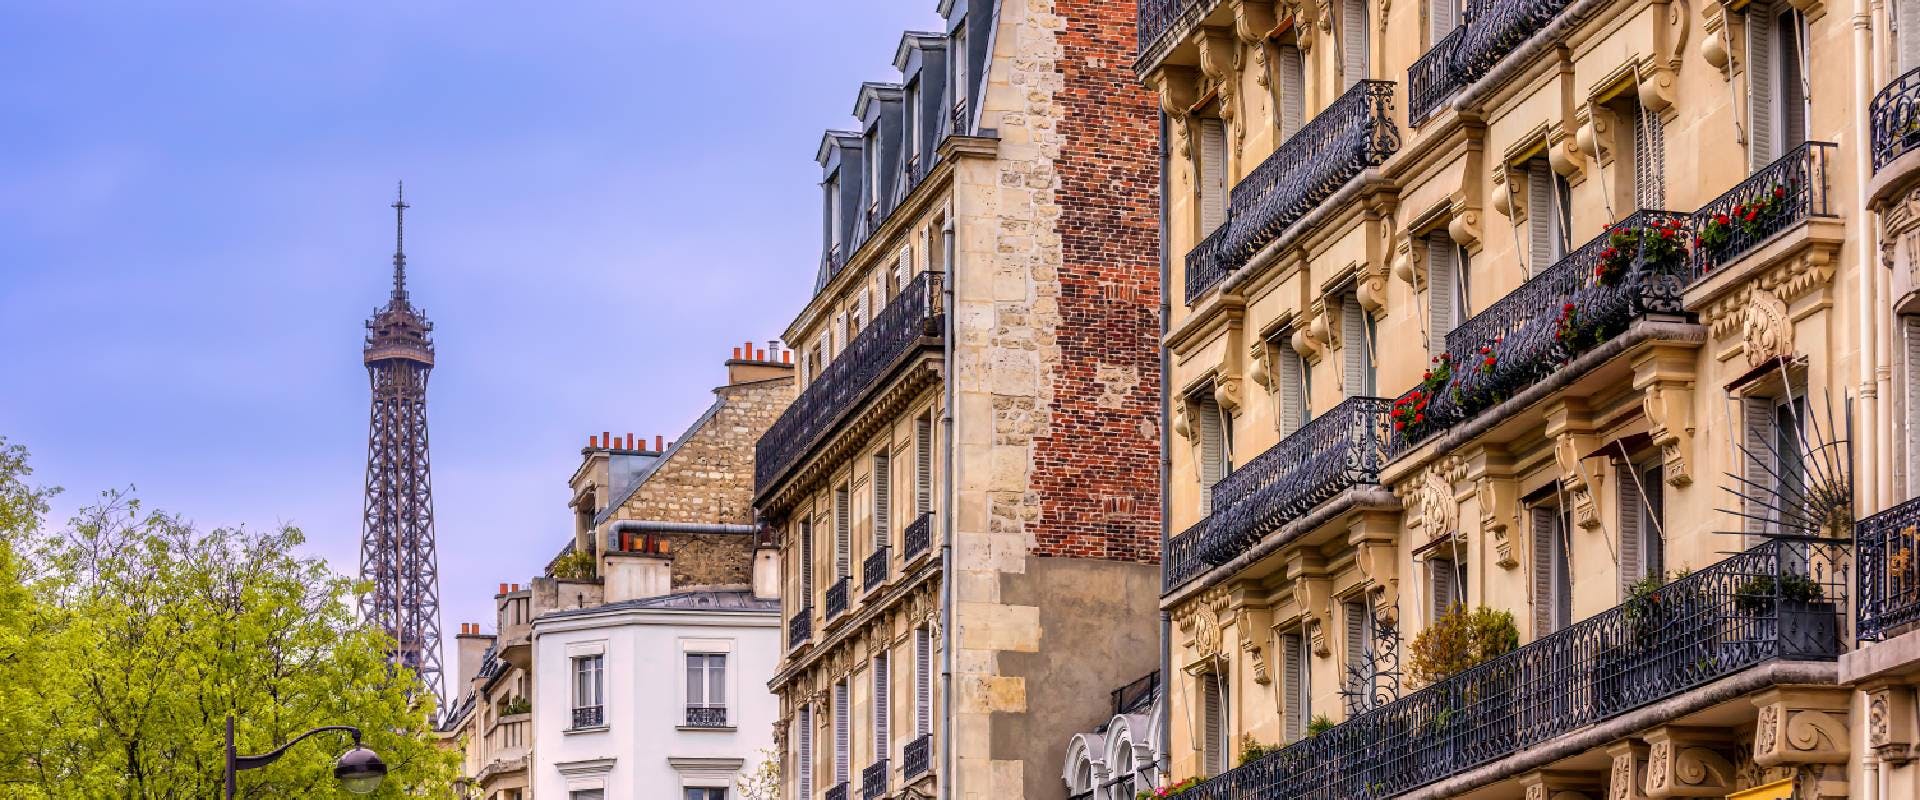 Traditional Parisian residential facades with the top of the Eiffel tower in the background